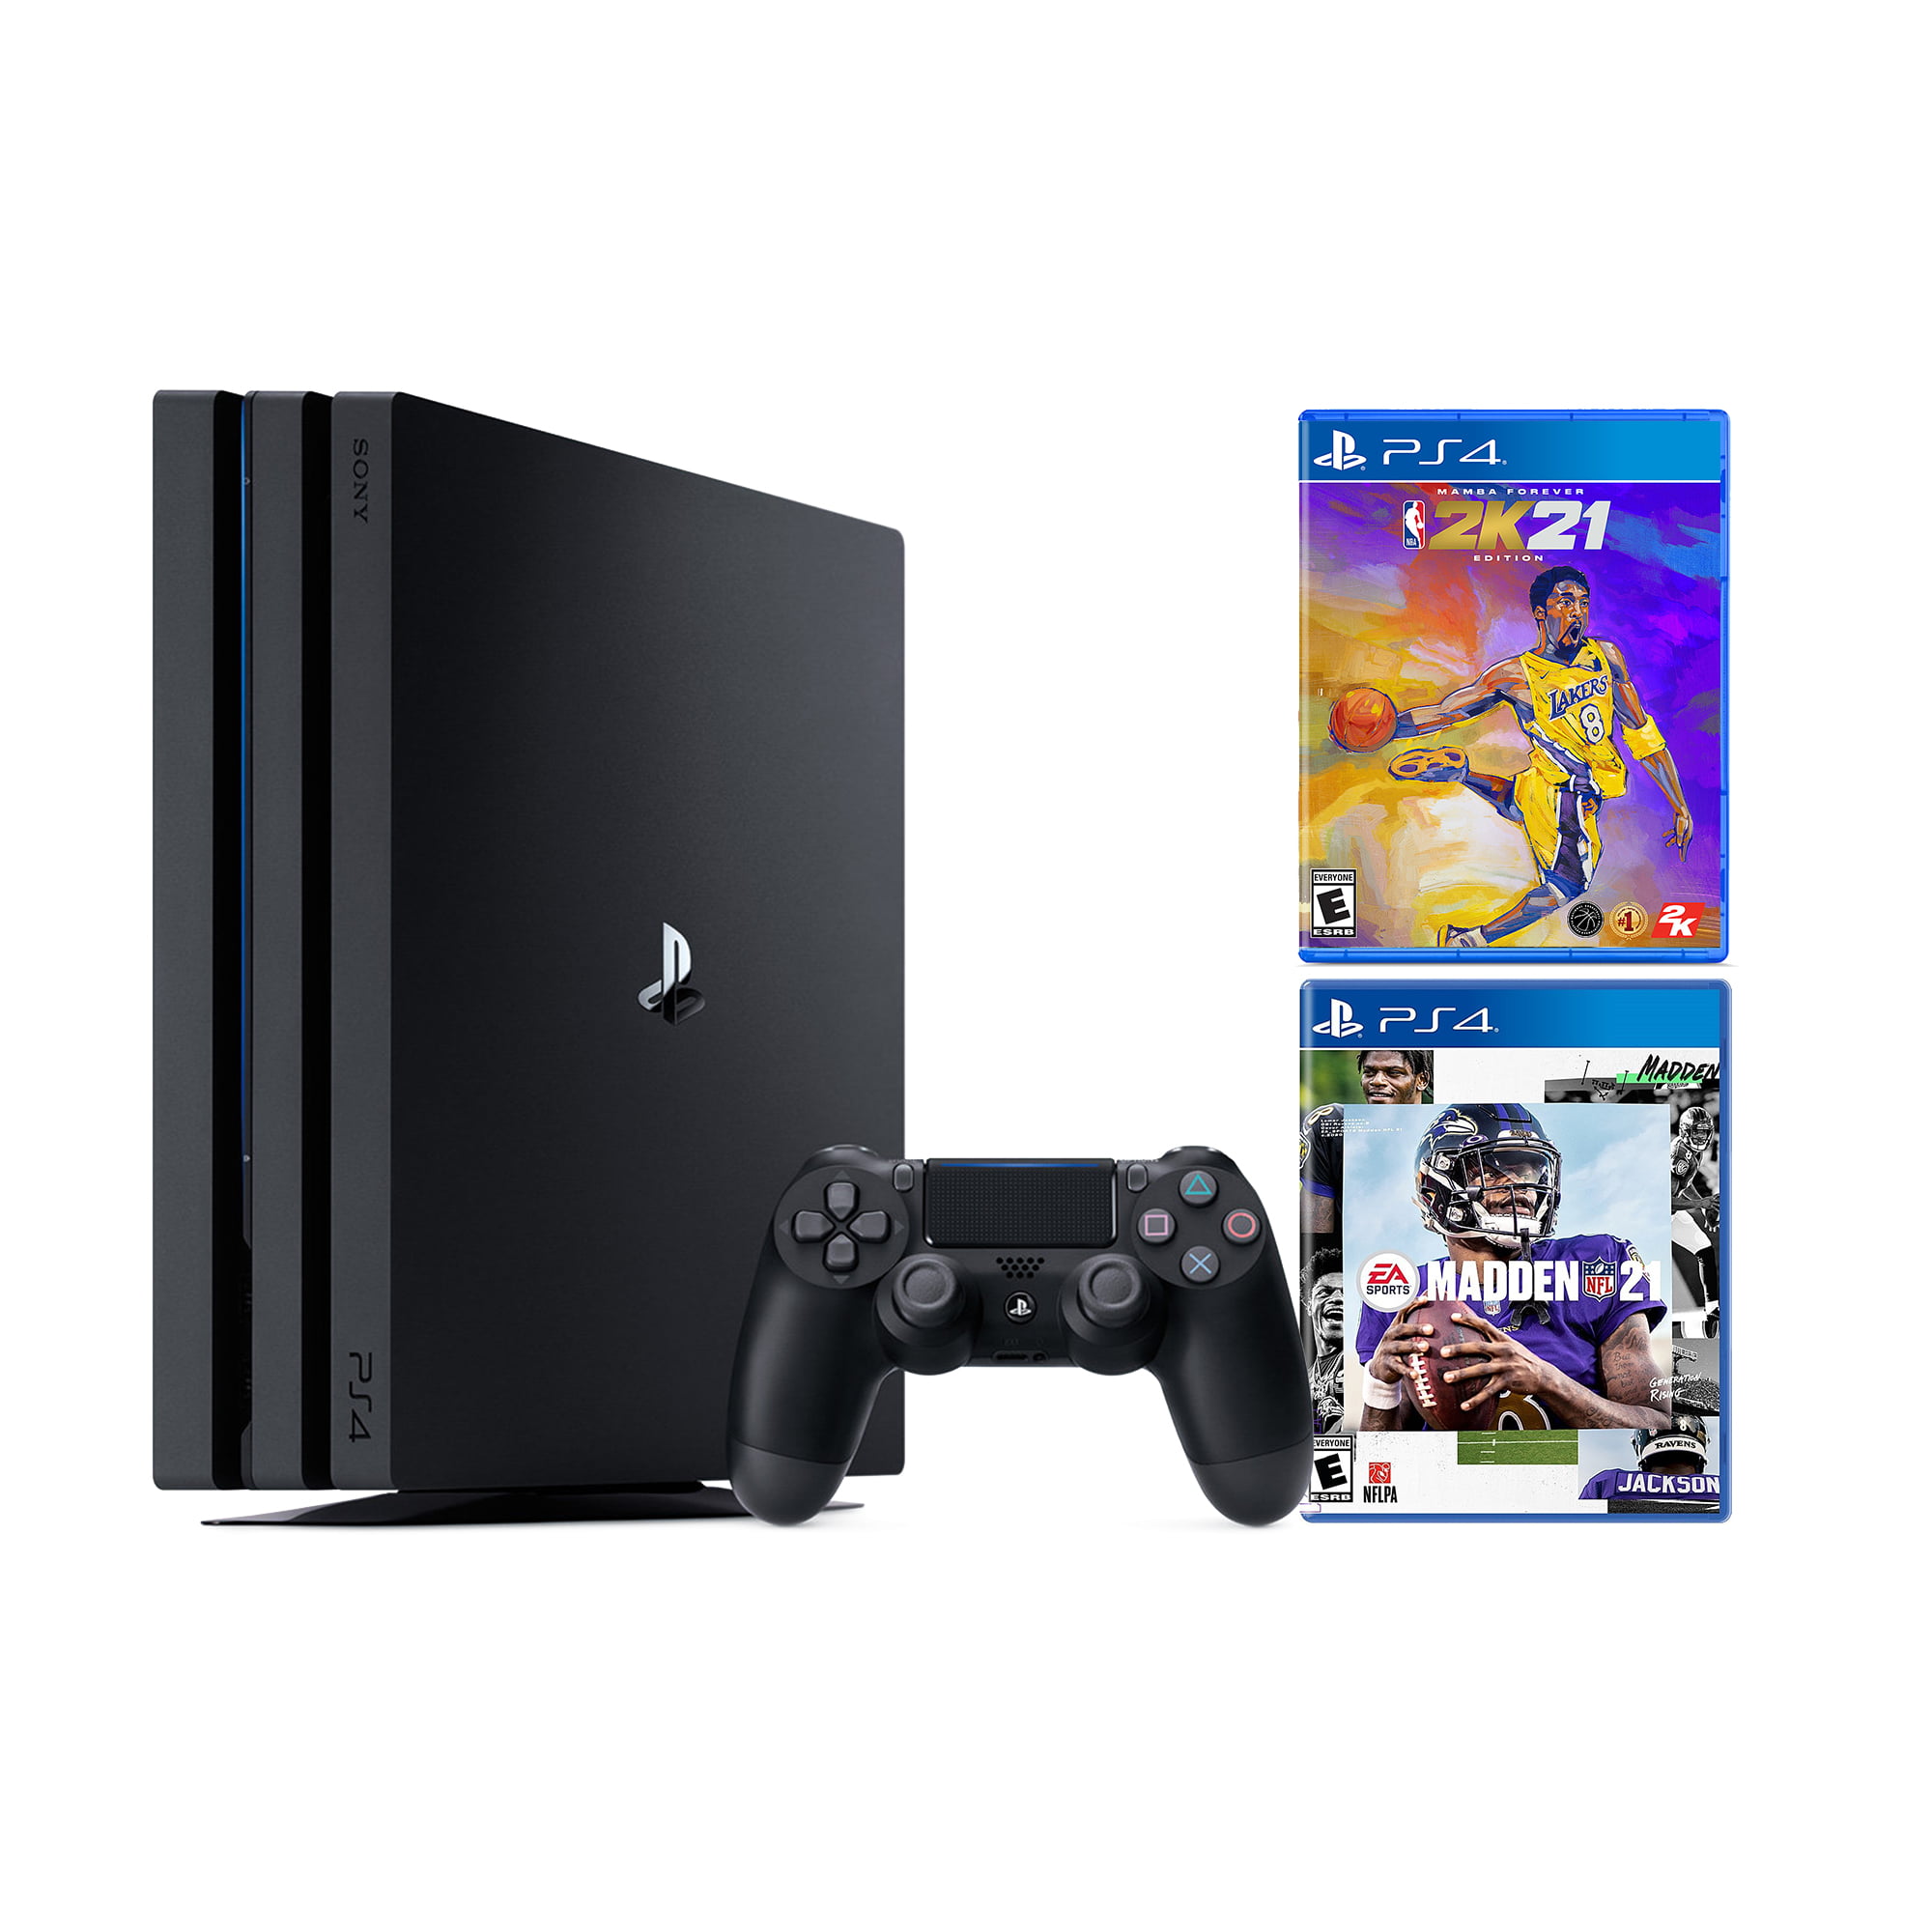 PlayStation 4 Pro 1TB Console with 2020 Sports Bundle - PS4 Pro 1TB Jet